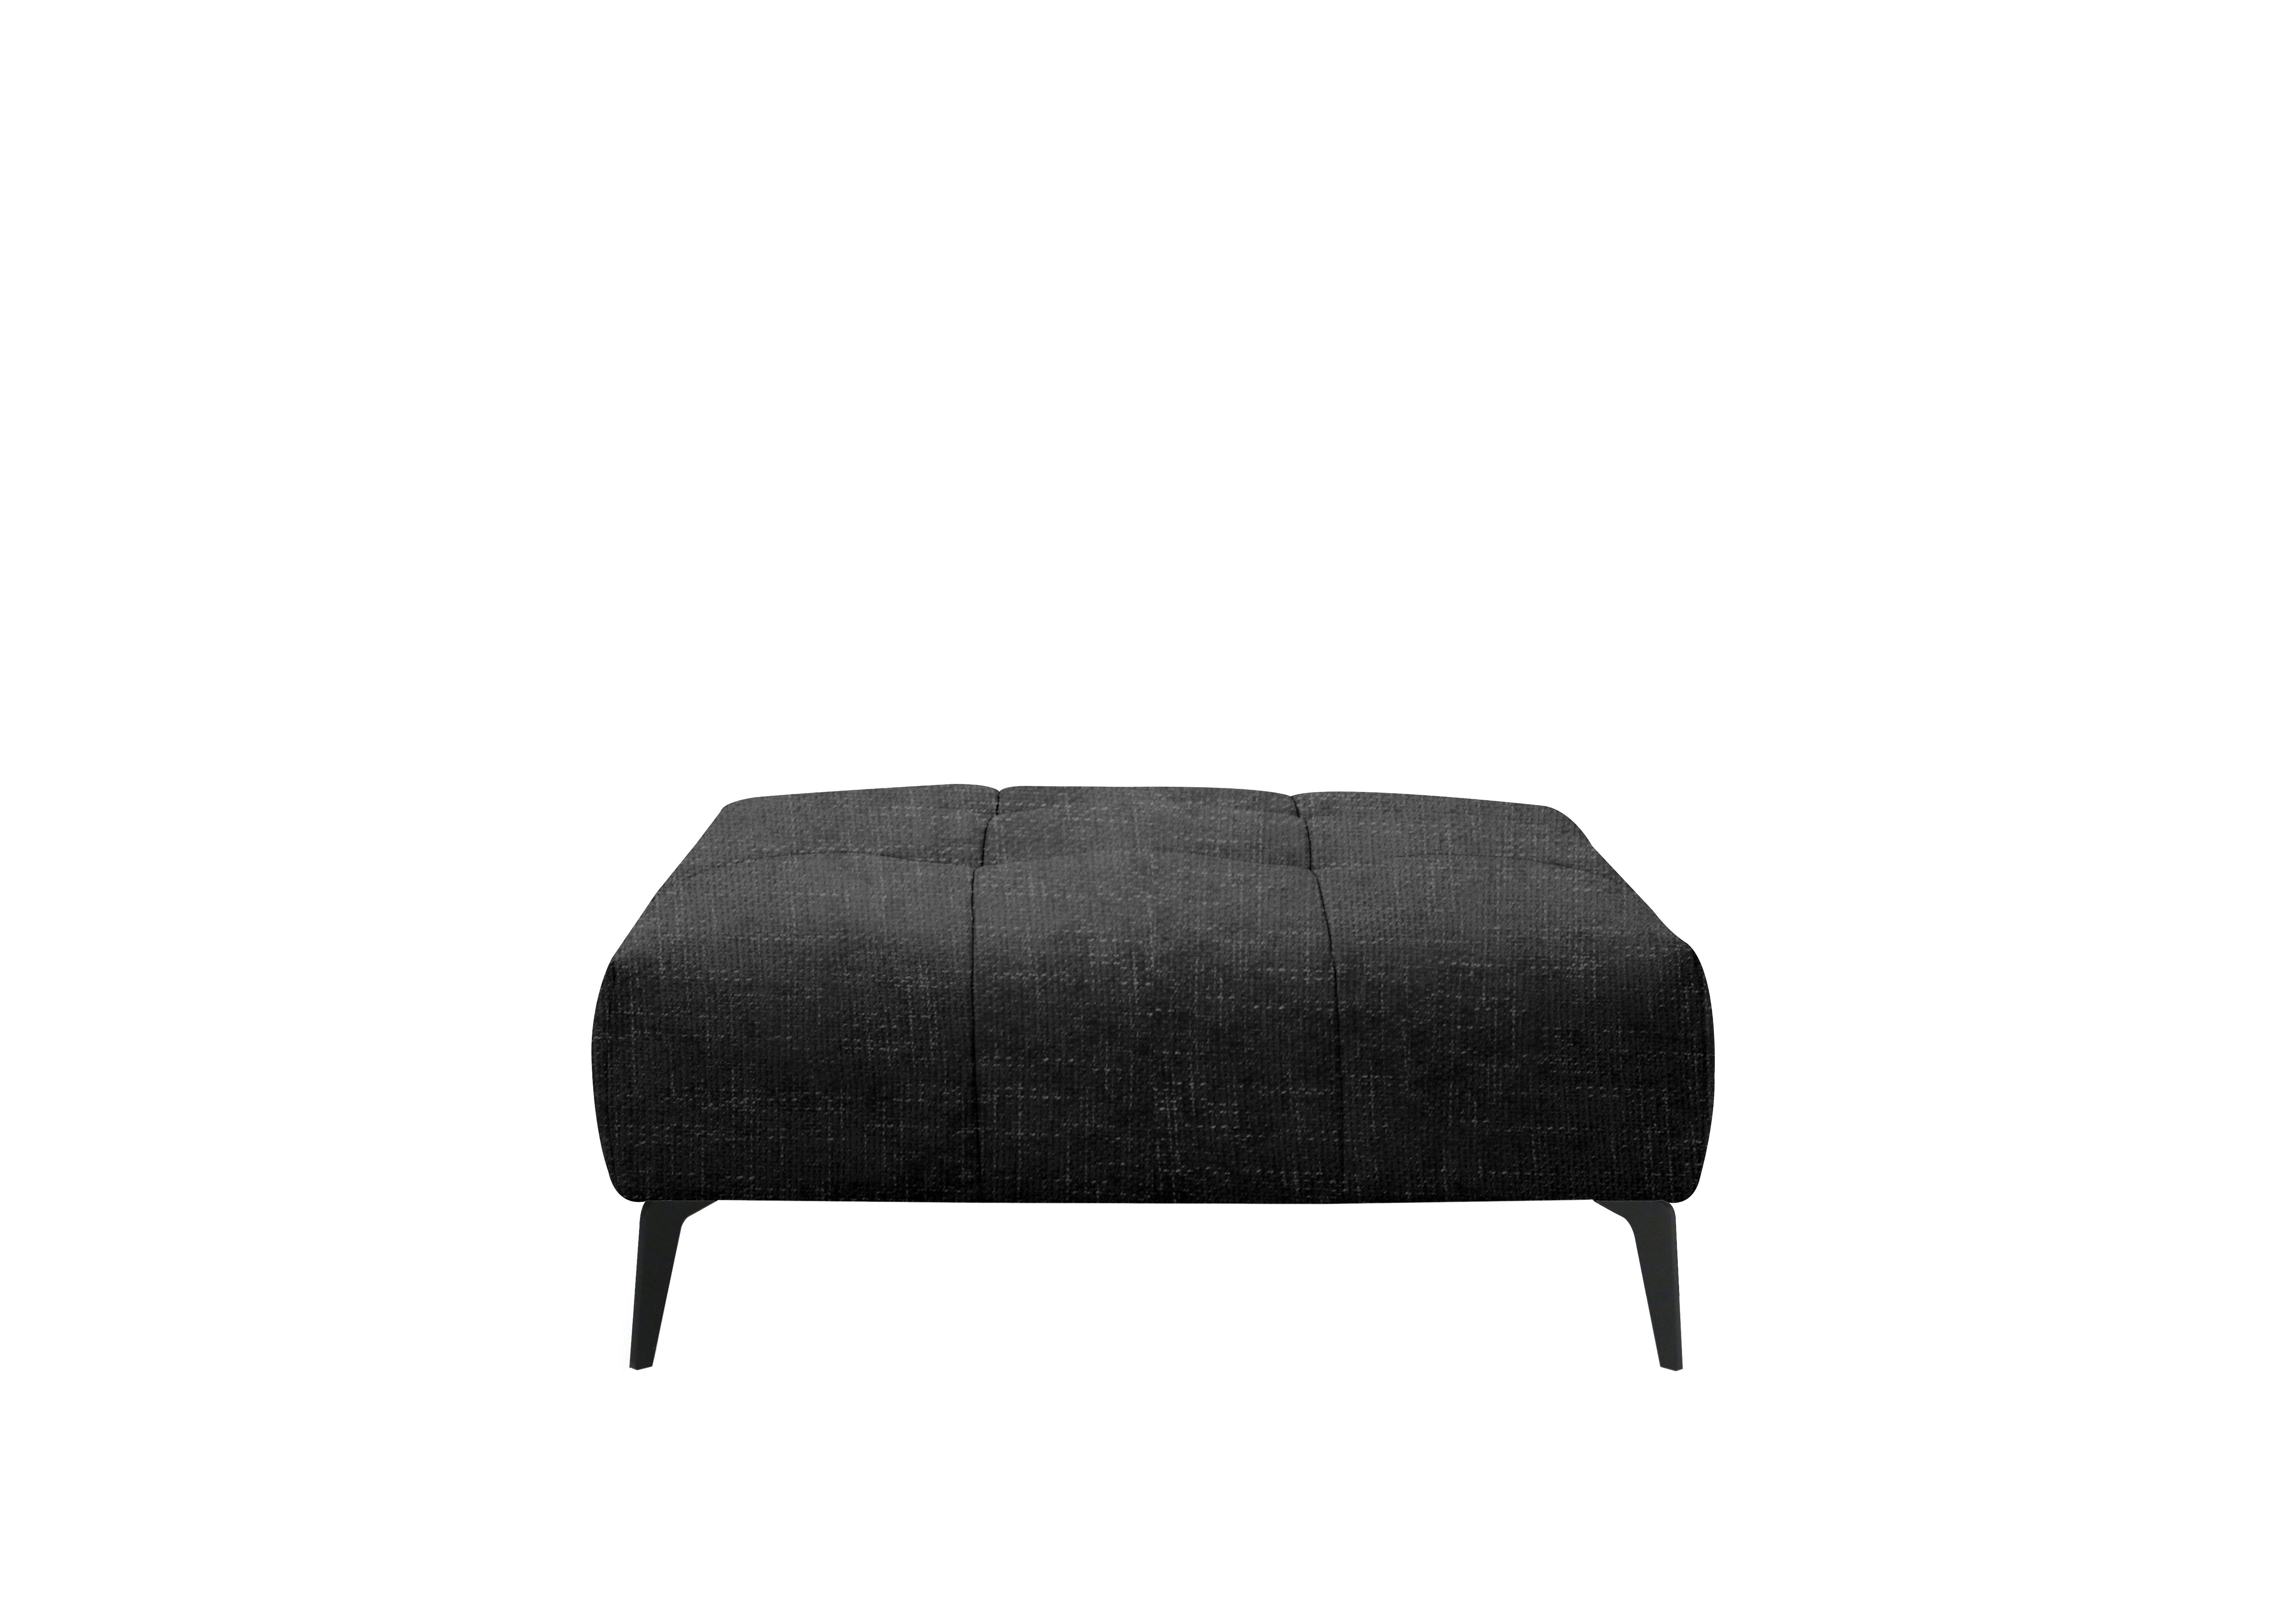 Lawson Fabric Footstool in Fab-Cac-R463 Black Mica on Furniture Village